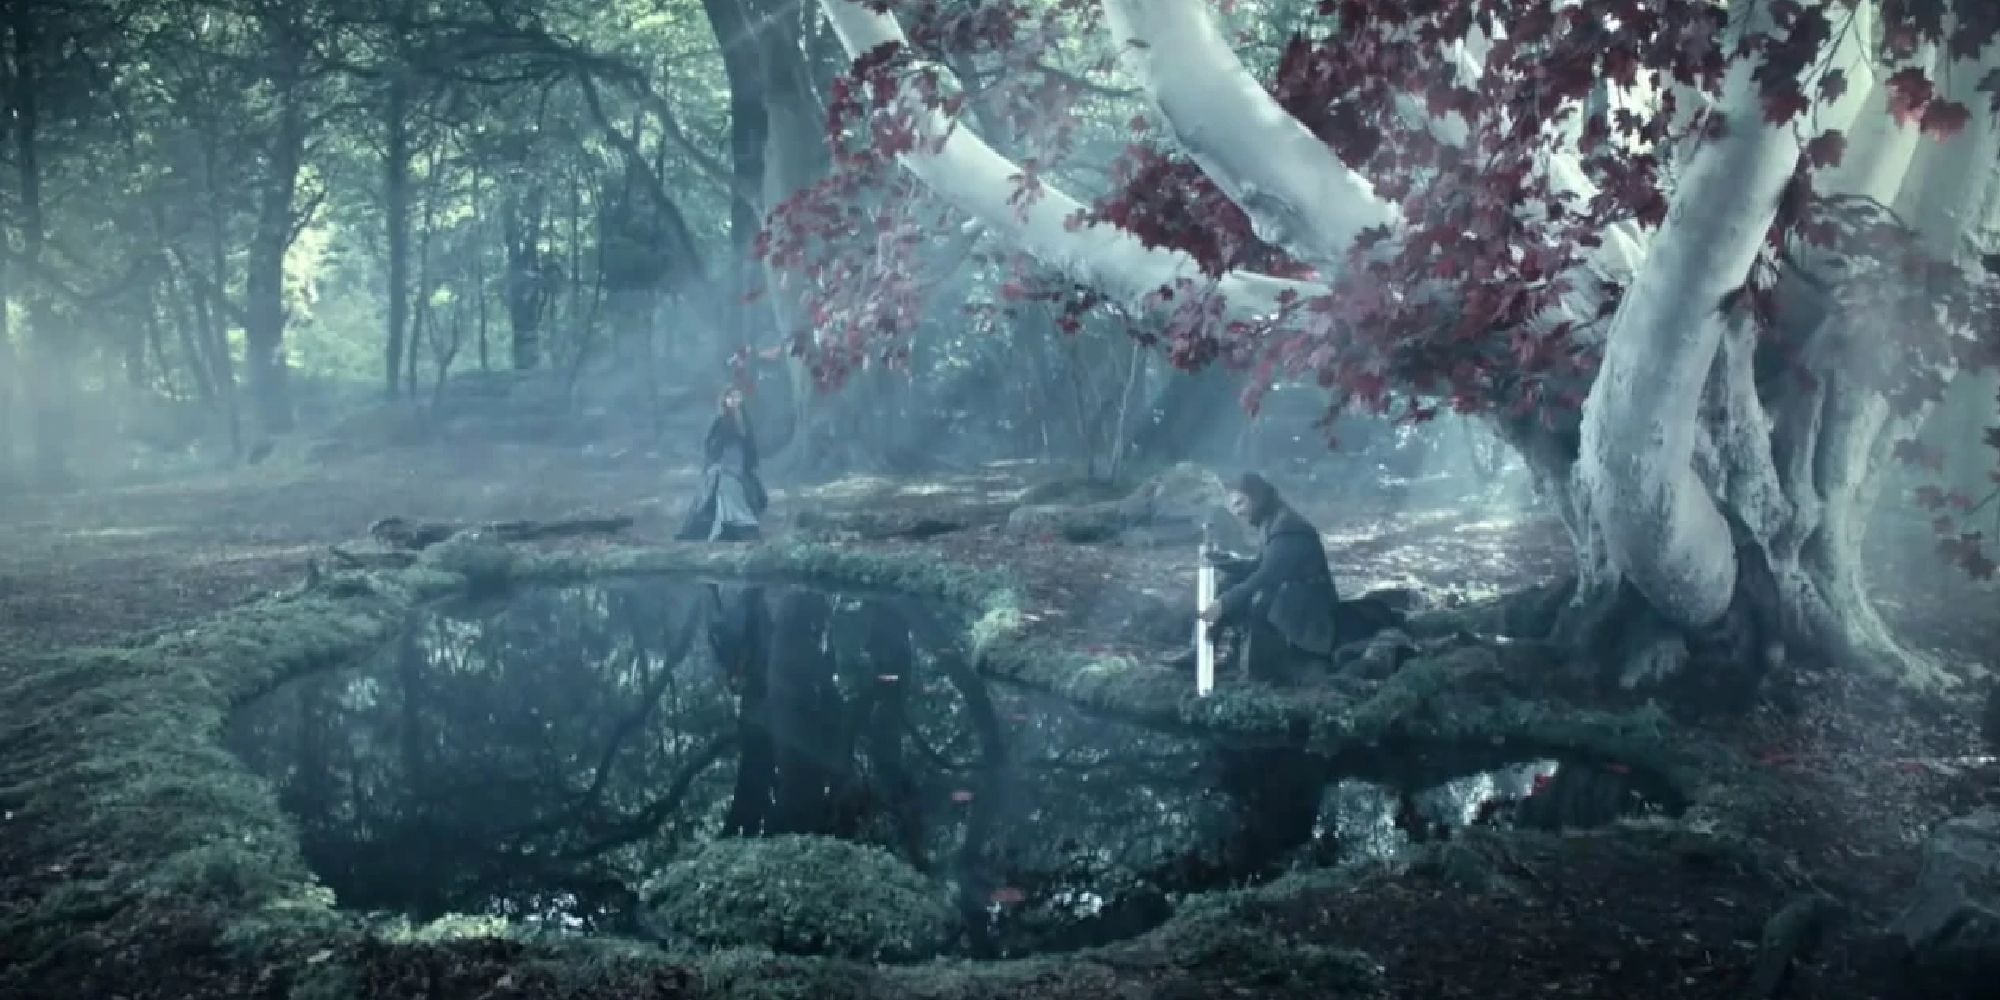 Ned Stark cleaning his sword by the Weirwood tree as Catelyn approaches in the Game of Thrones pilot